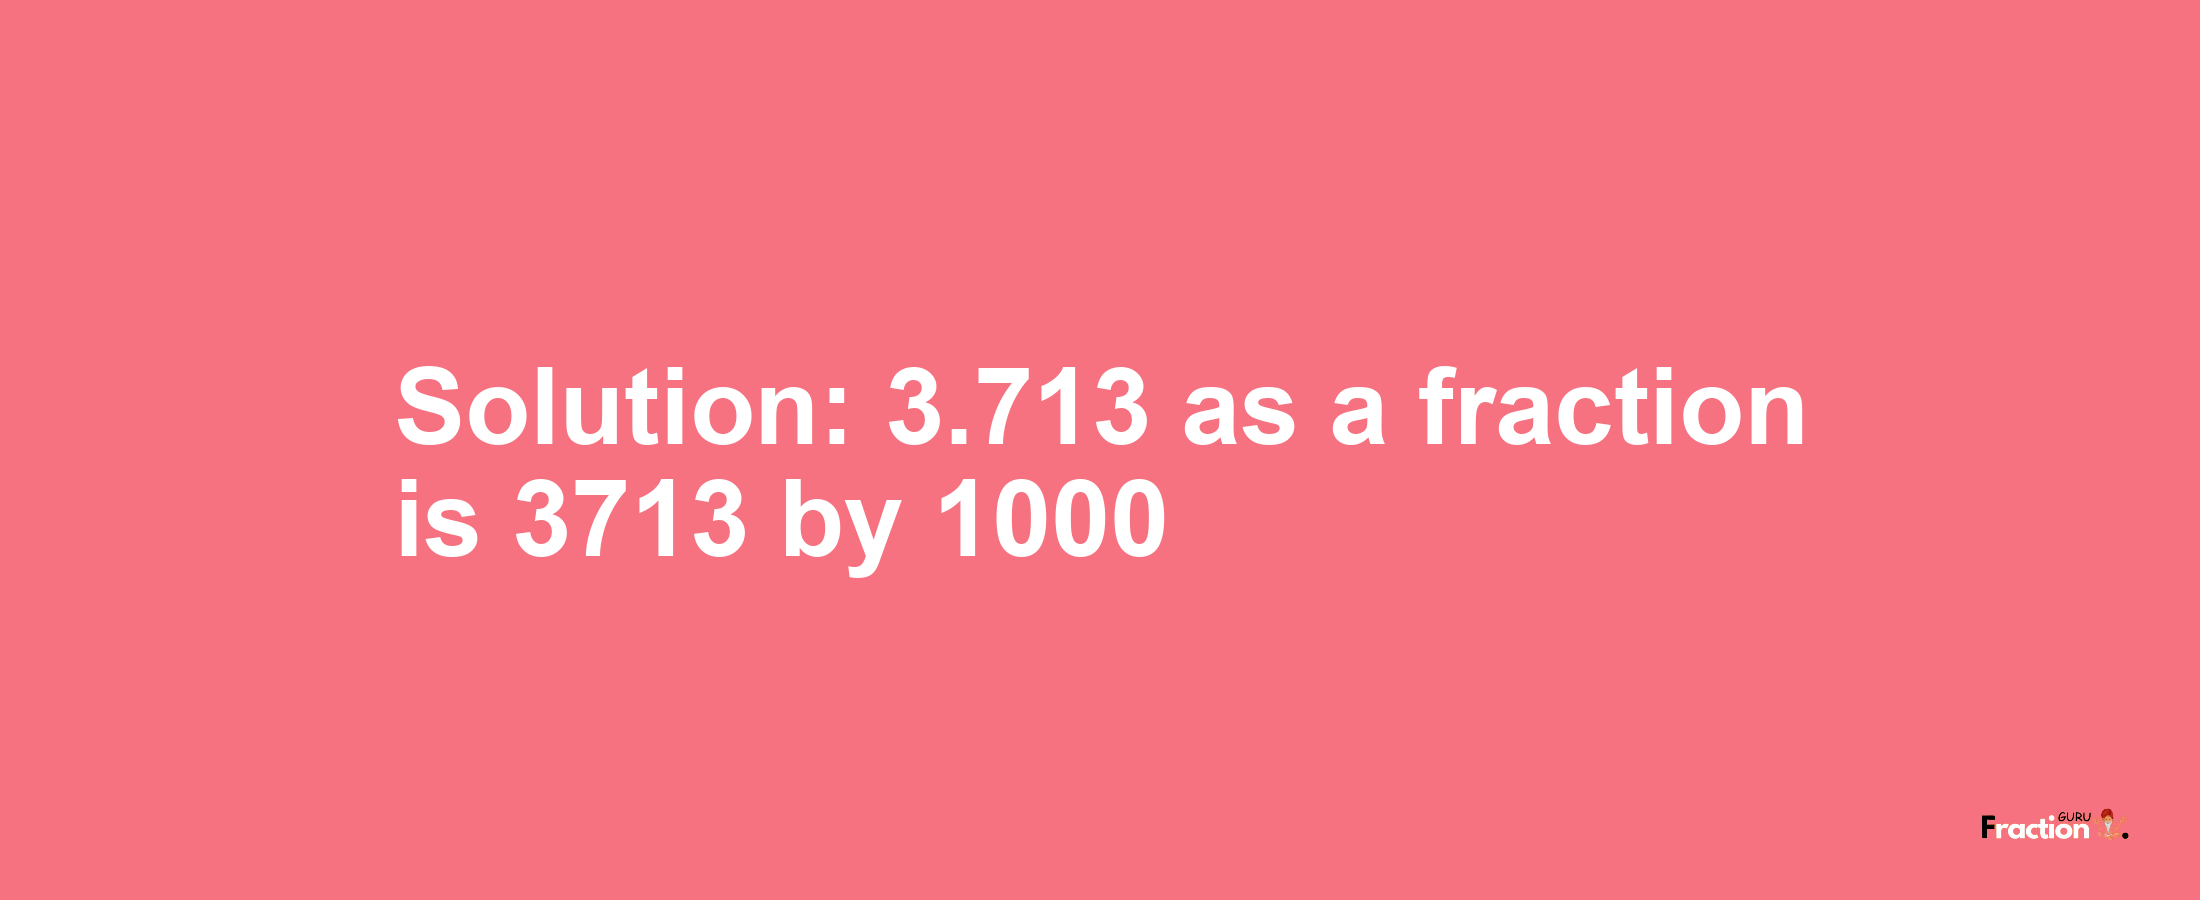 Solution:3.713 as a fraction is 3713/1000